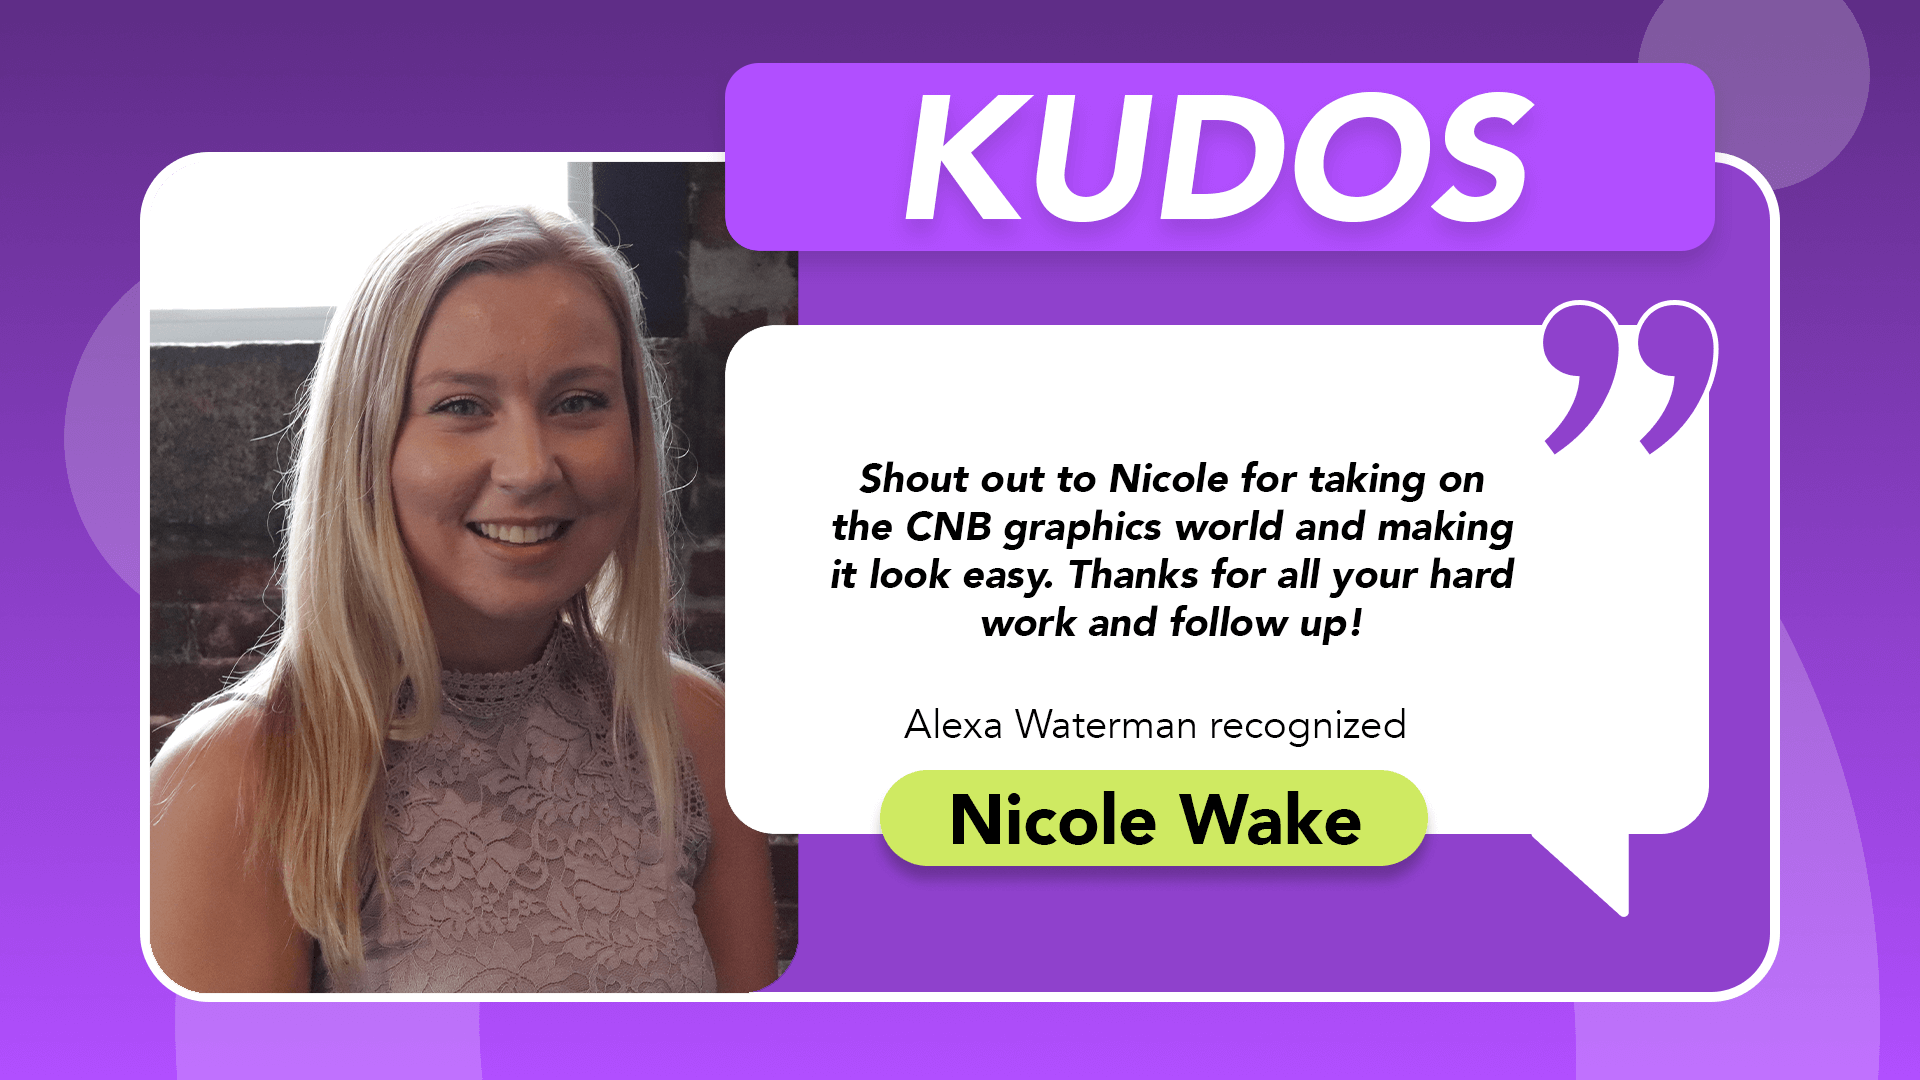 photo of blonde smiling woman with Kudos in large letters. below kudos is a shout out praising employee nicole wake for her hard work and followup on a graphics project